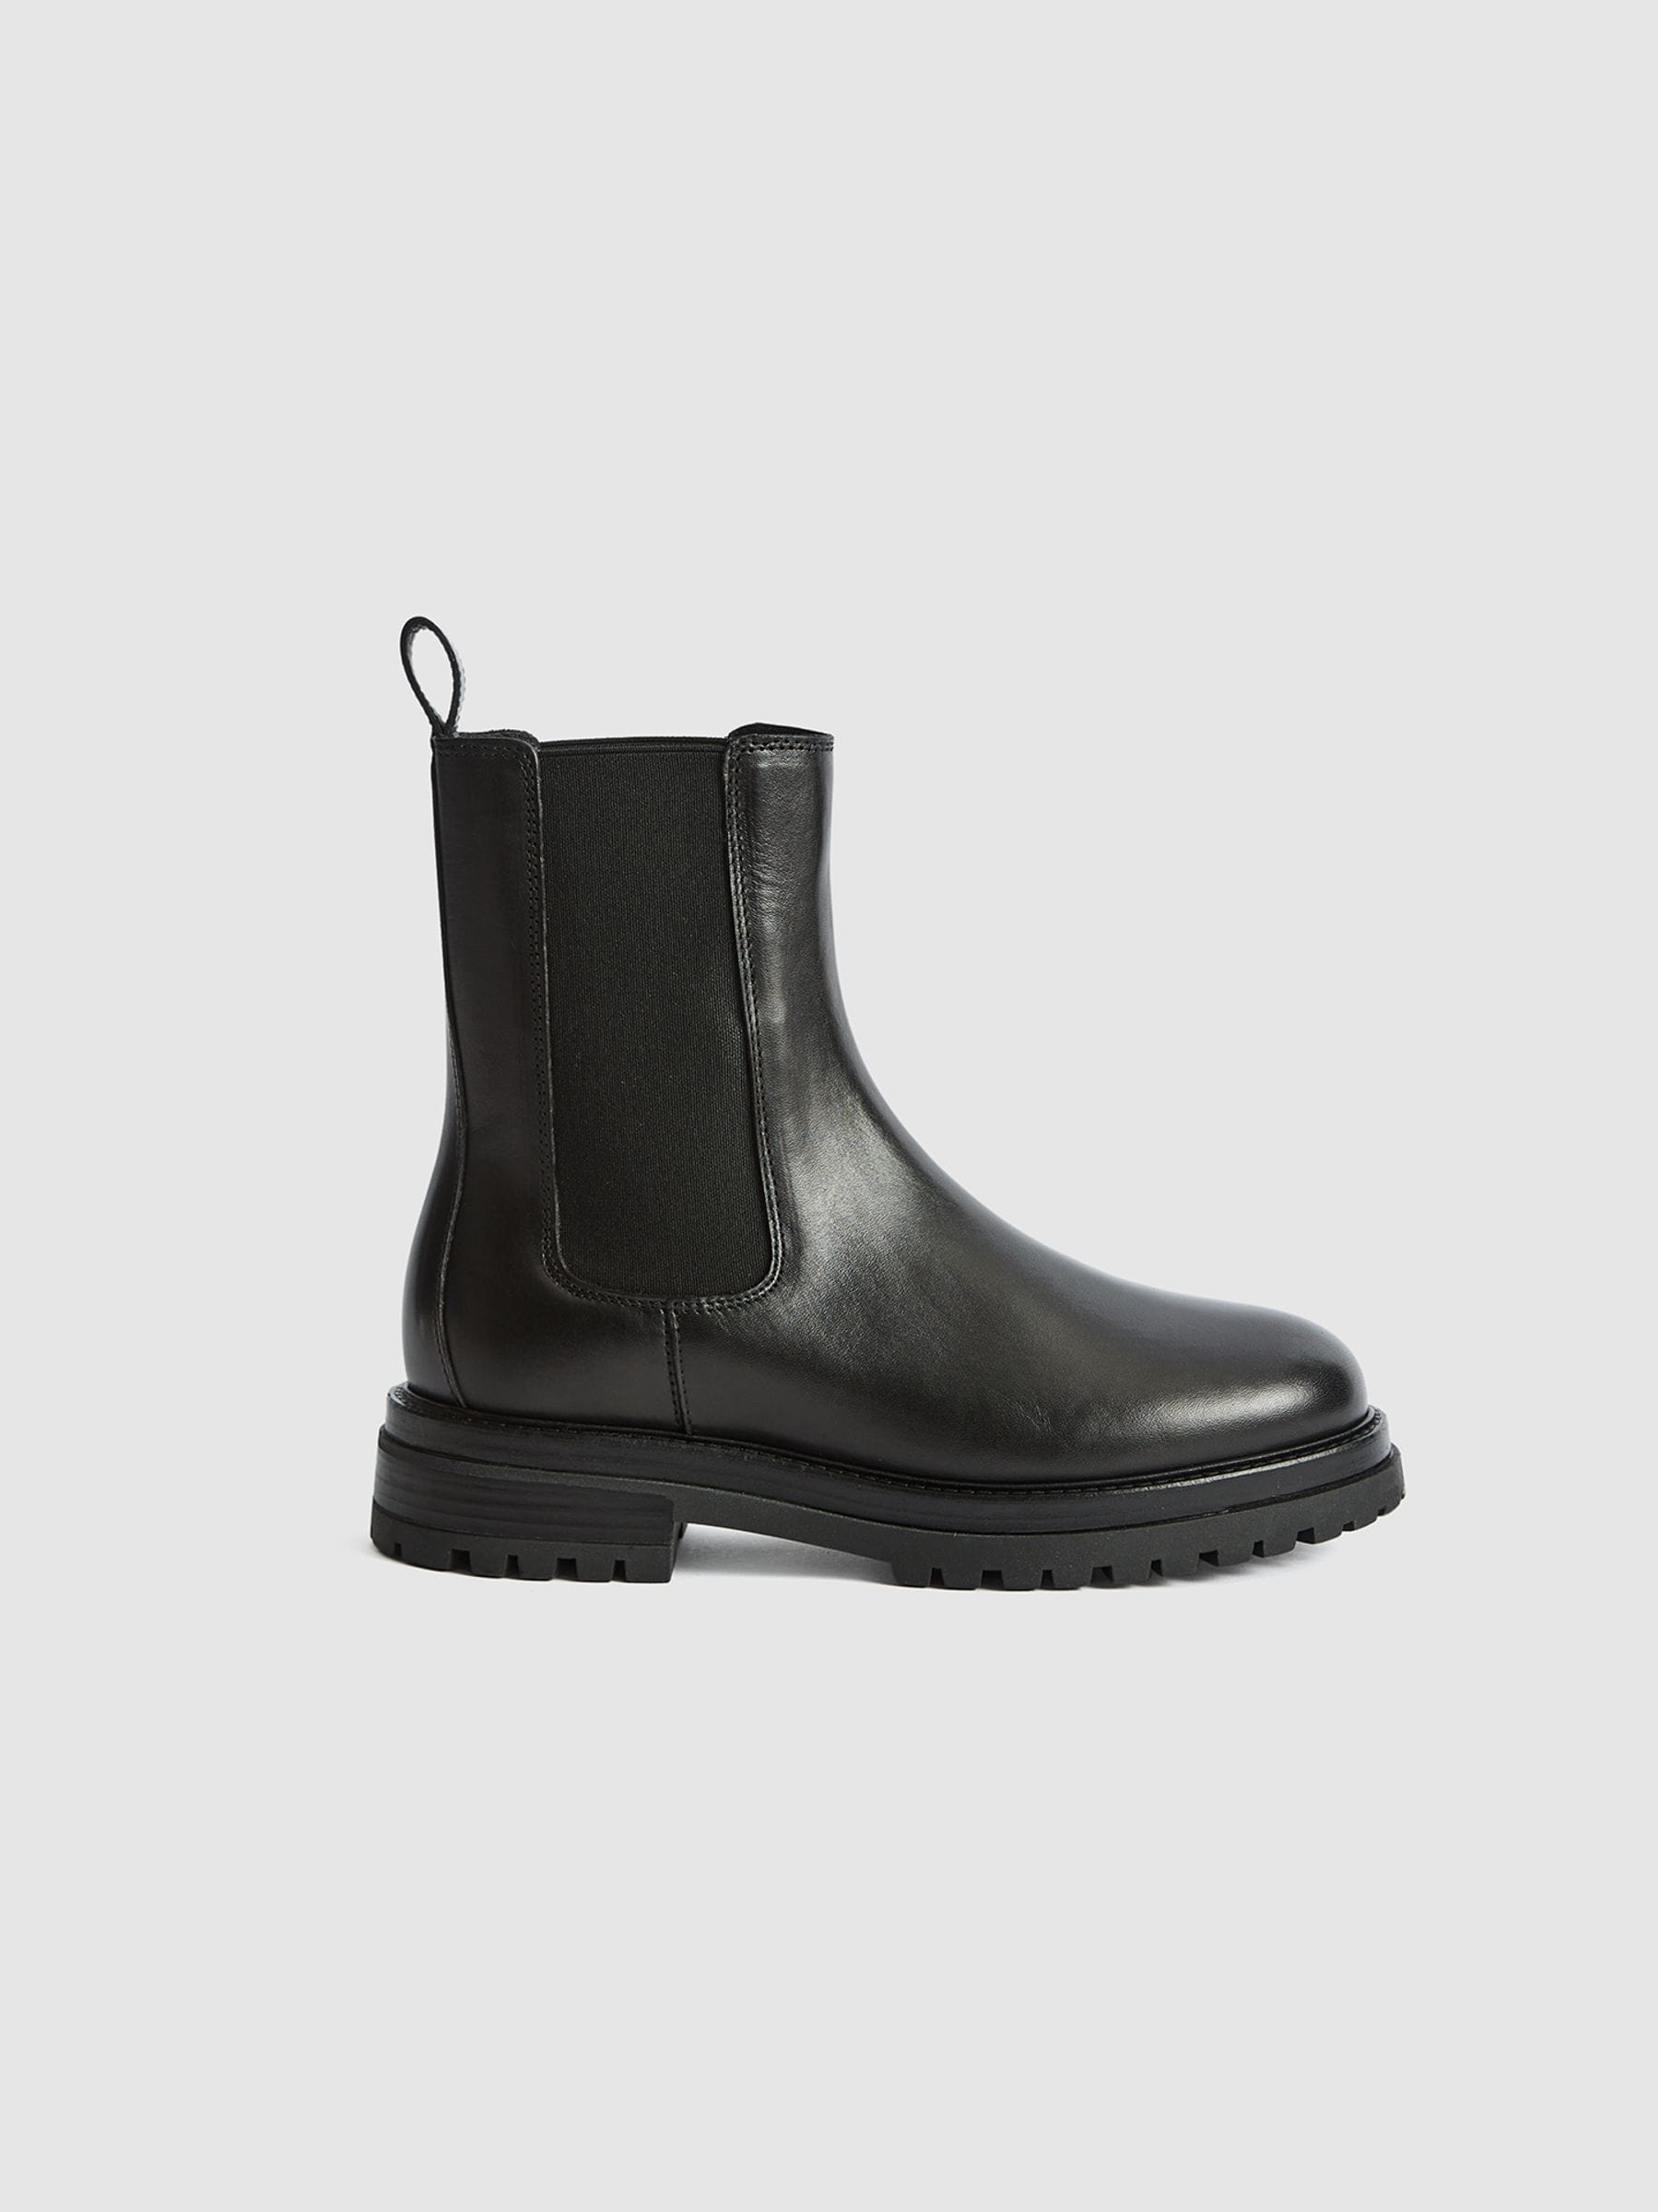 Reiss Thea Leather Chelsea Boots | REISS USA